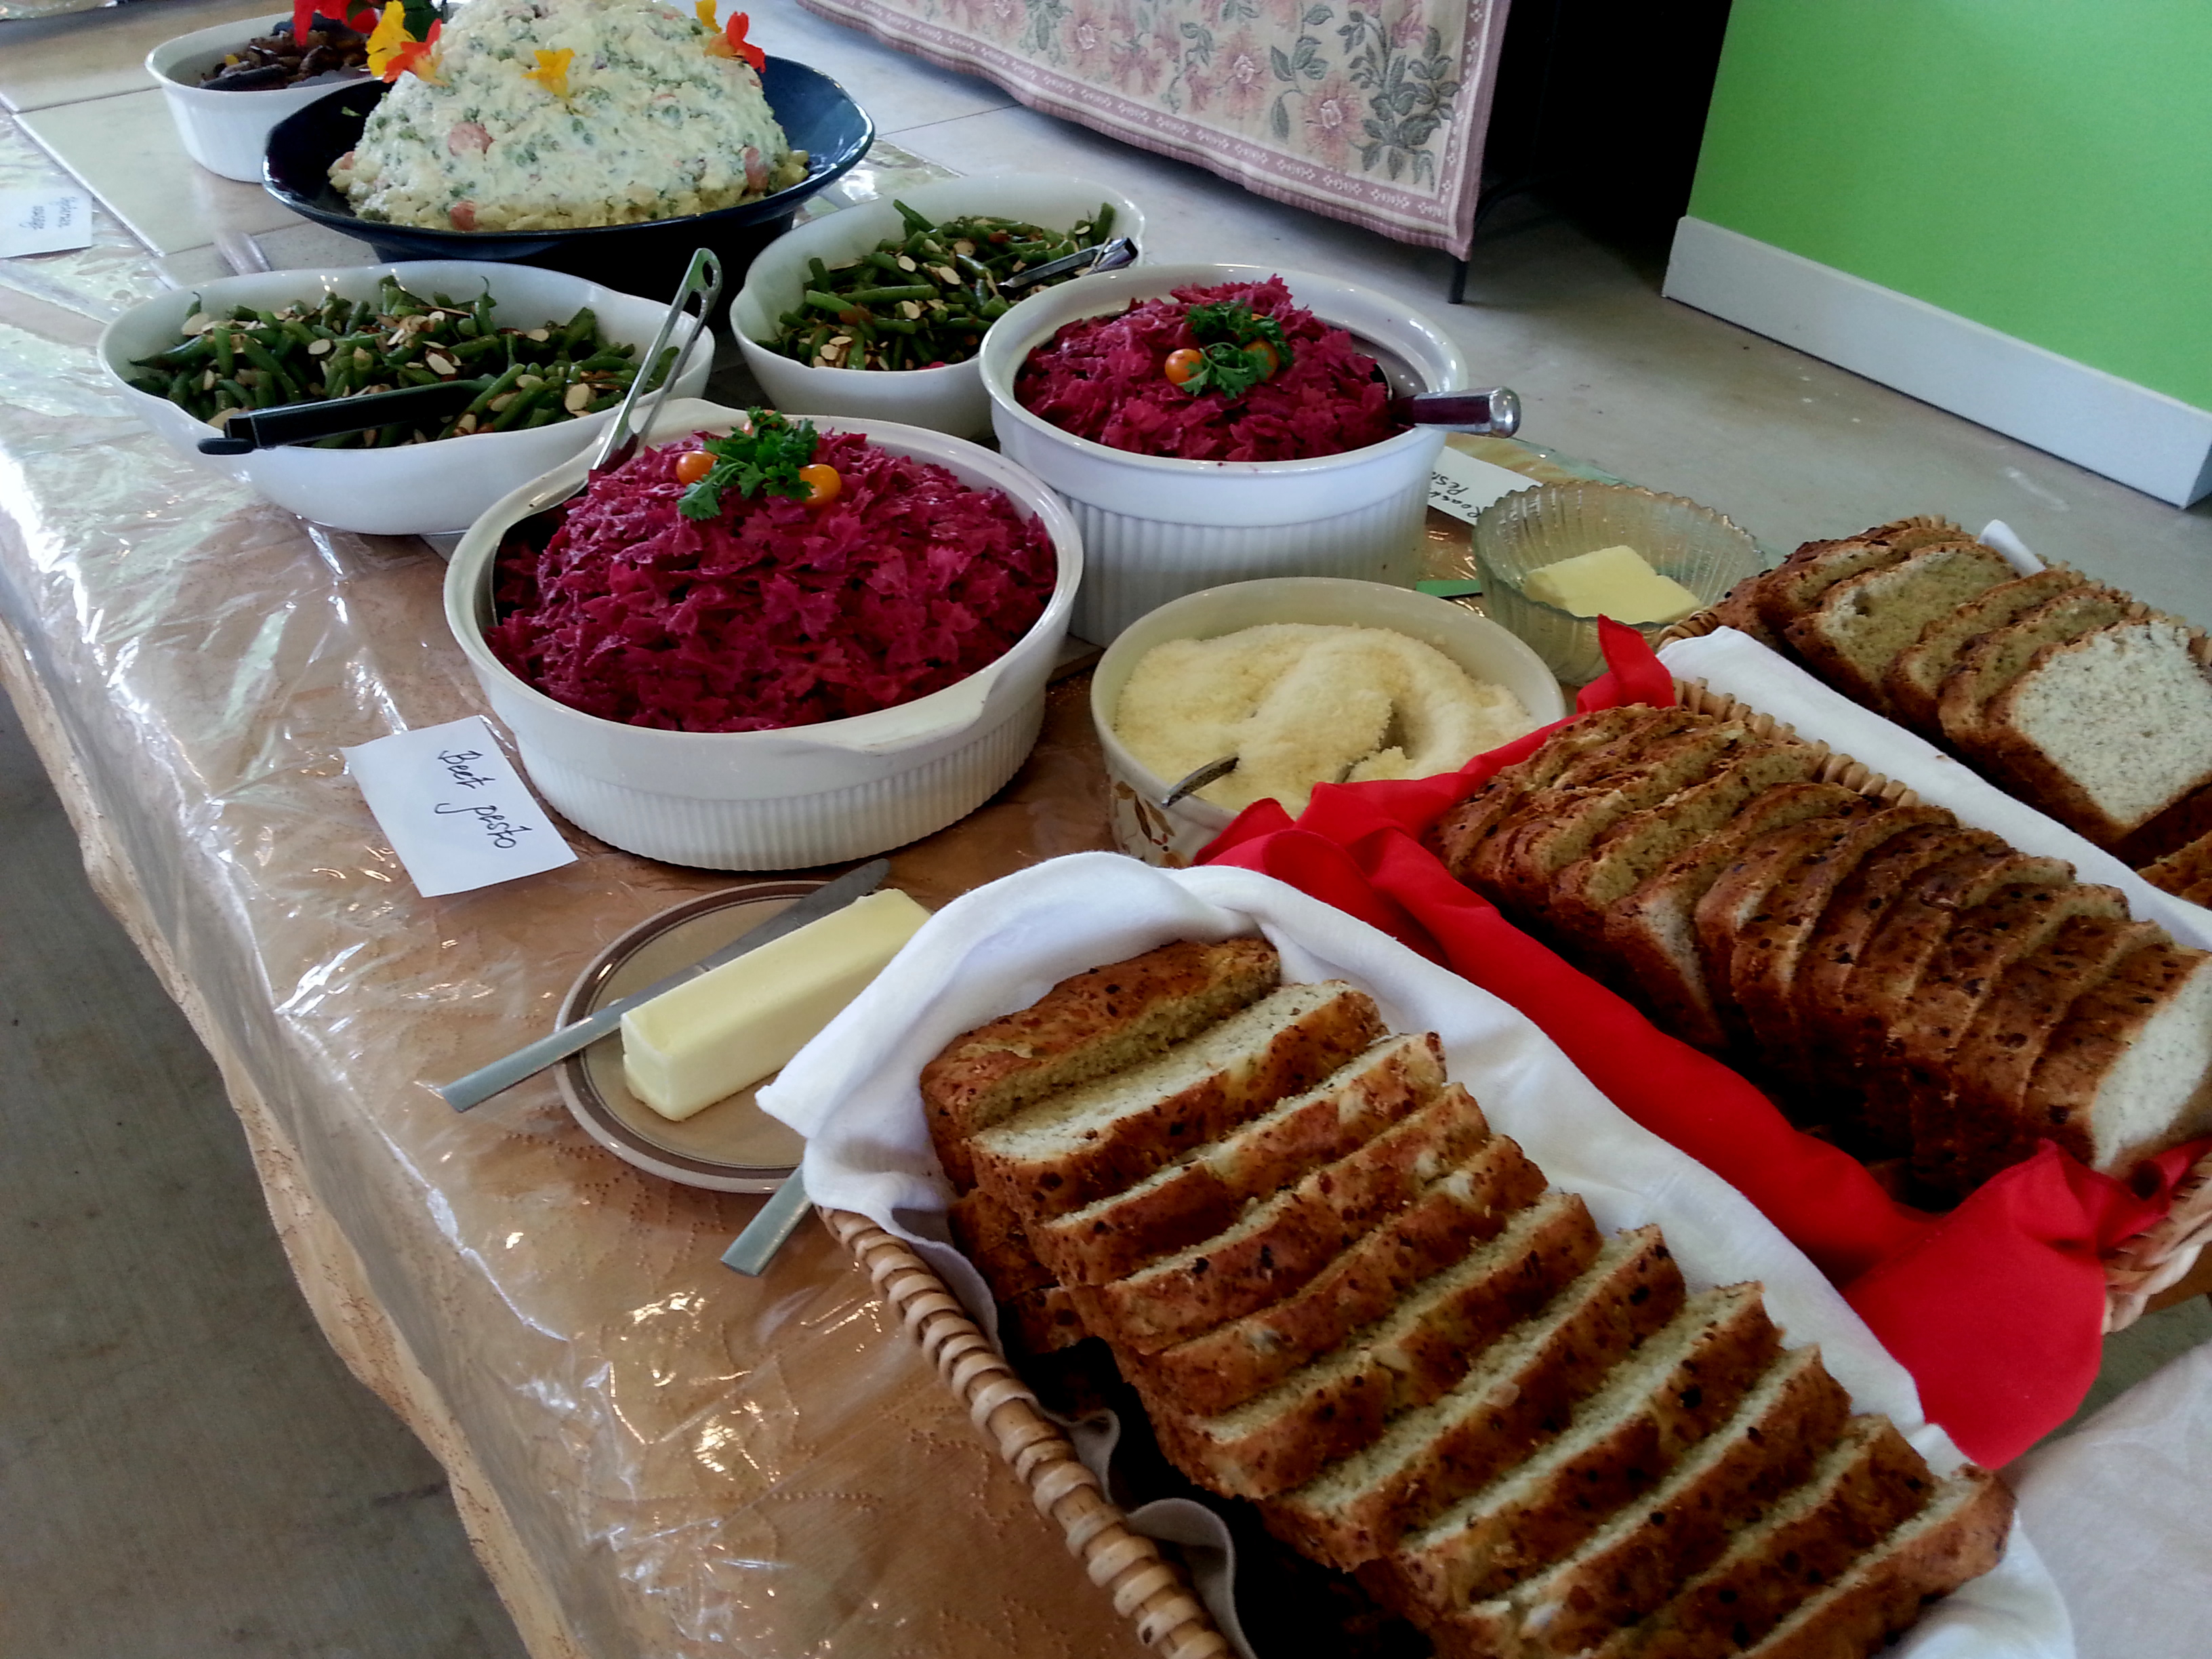 The sangha enjoyed a delicious luncheon prepared by the new residents of the building.